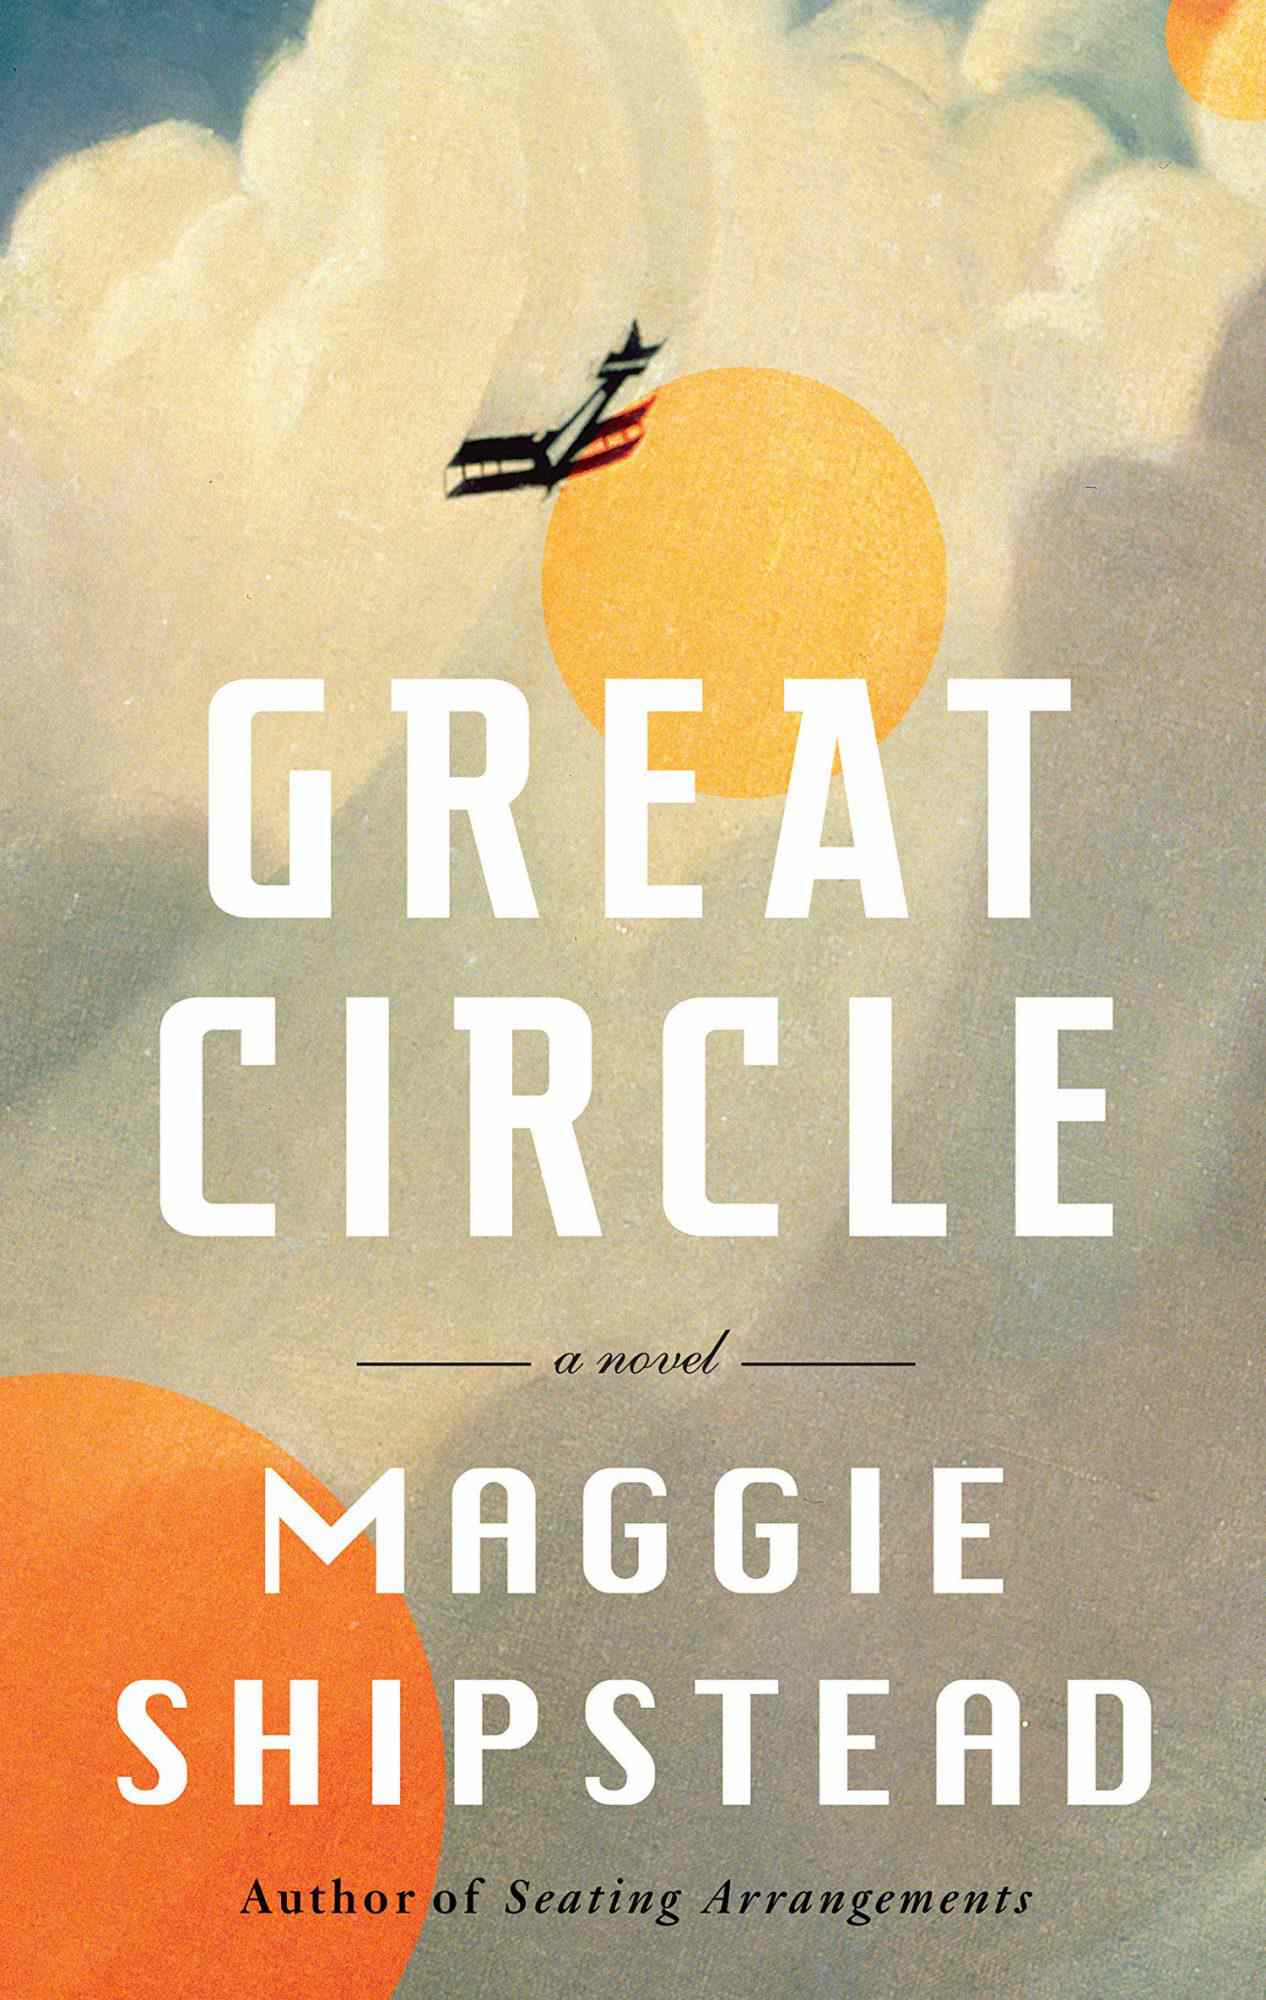 Great Circle, by Maggie Shipstead